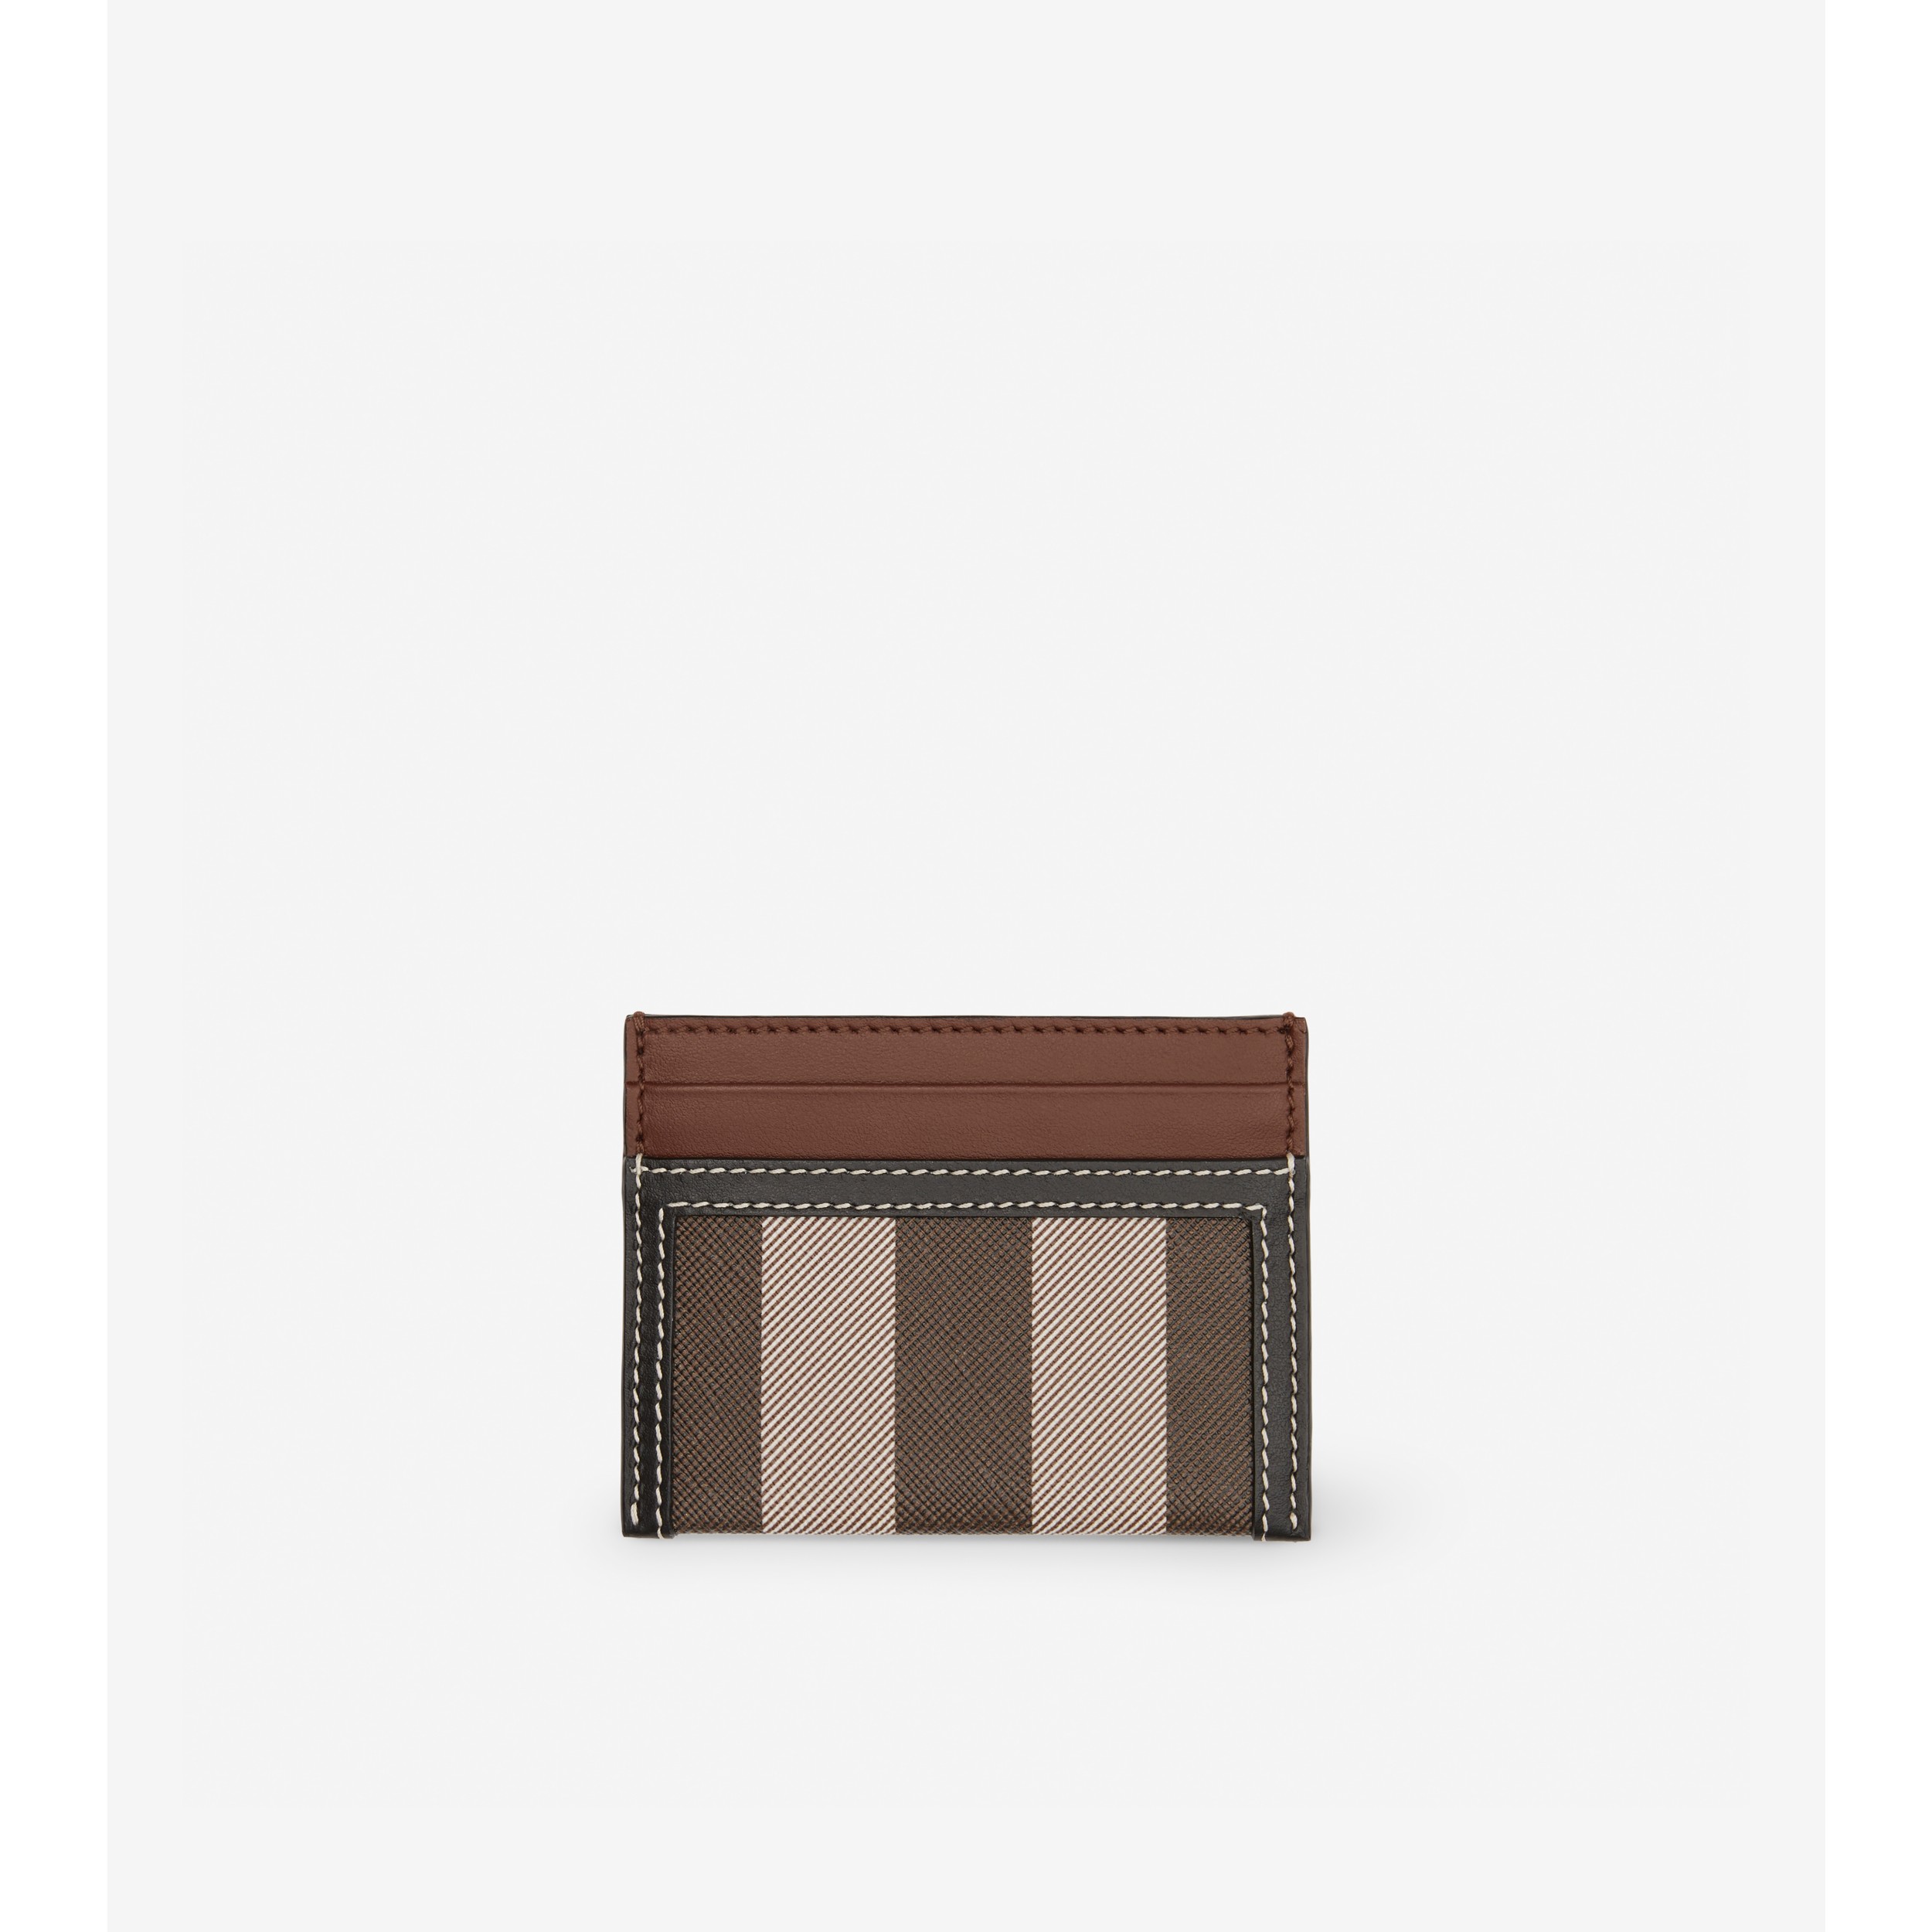 Burberry Two-tone Trench Leather Card Case  Leather wallet design,  Handcrafted leather wallet, Leather wallet mens